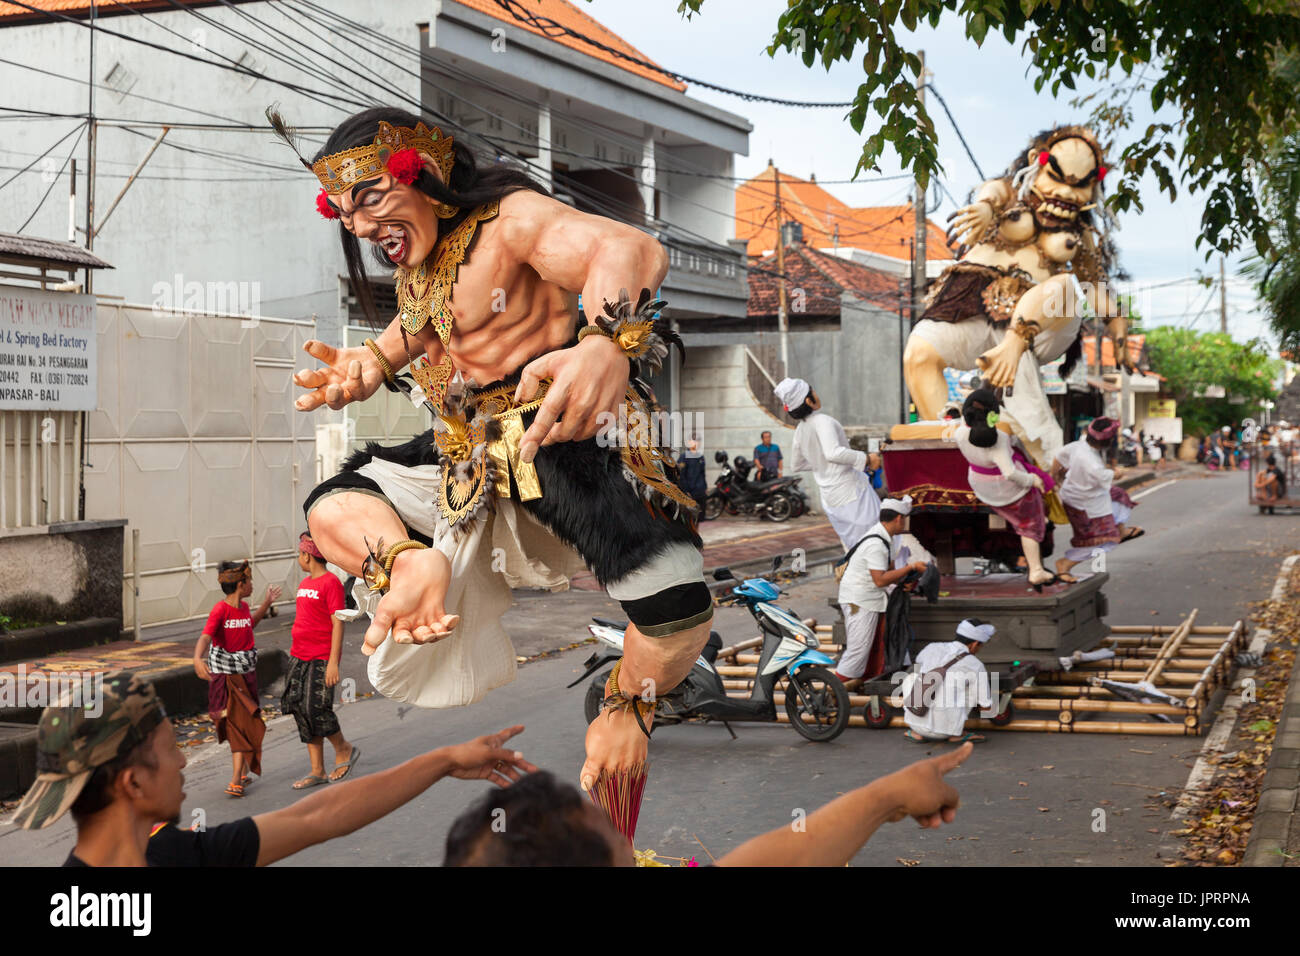 Nyepi - Day of Silence in Bali, fantastic characters of the balinese hindu gods on the street tropical island of Bali Stock Photo